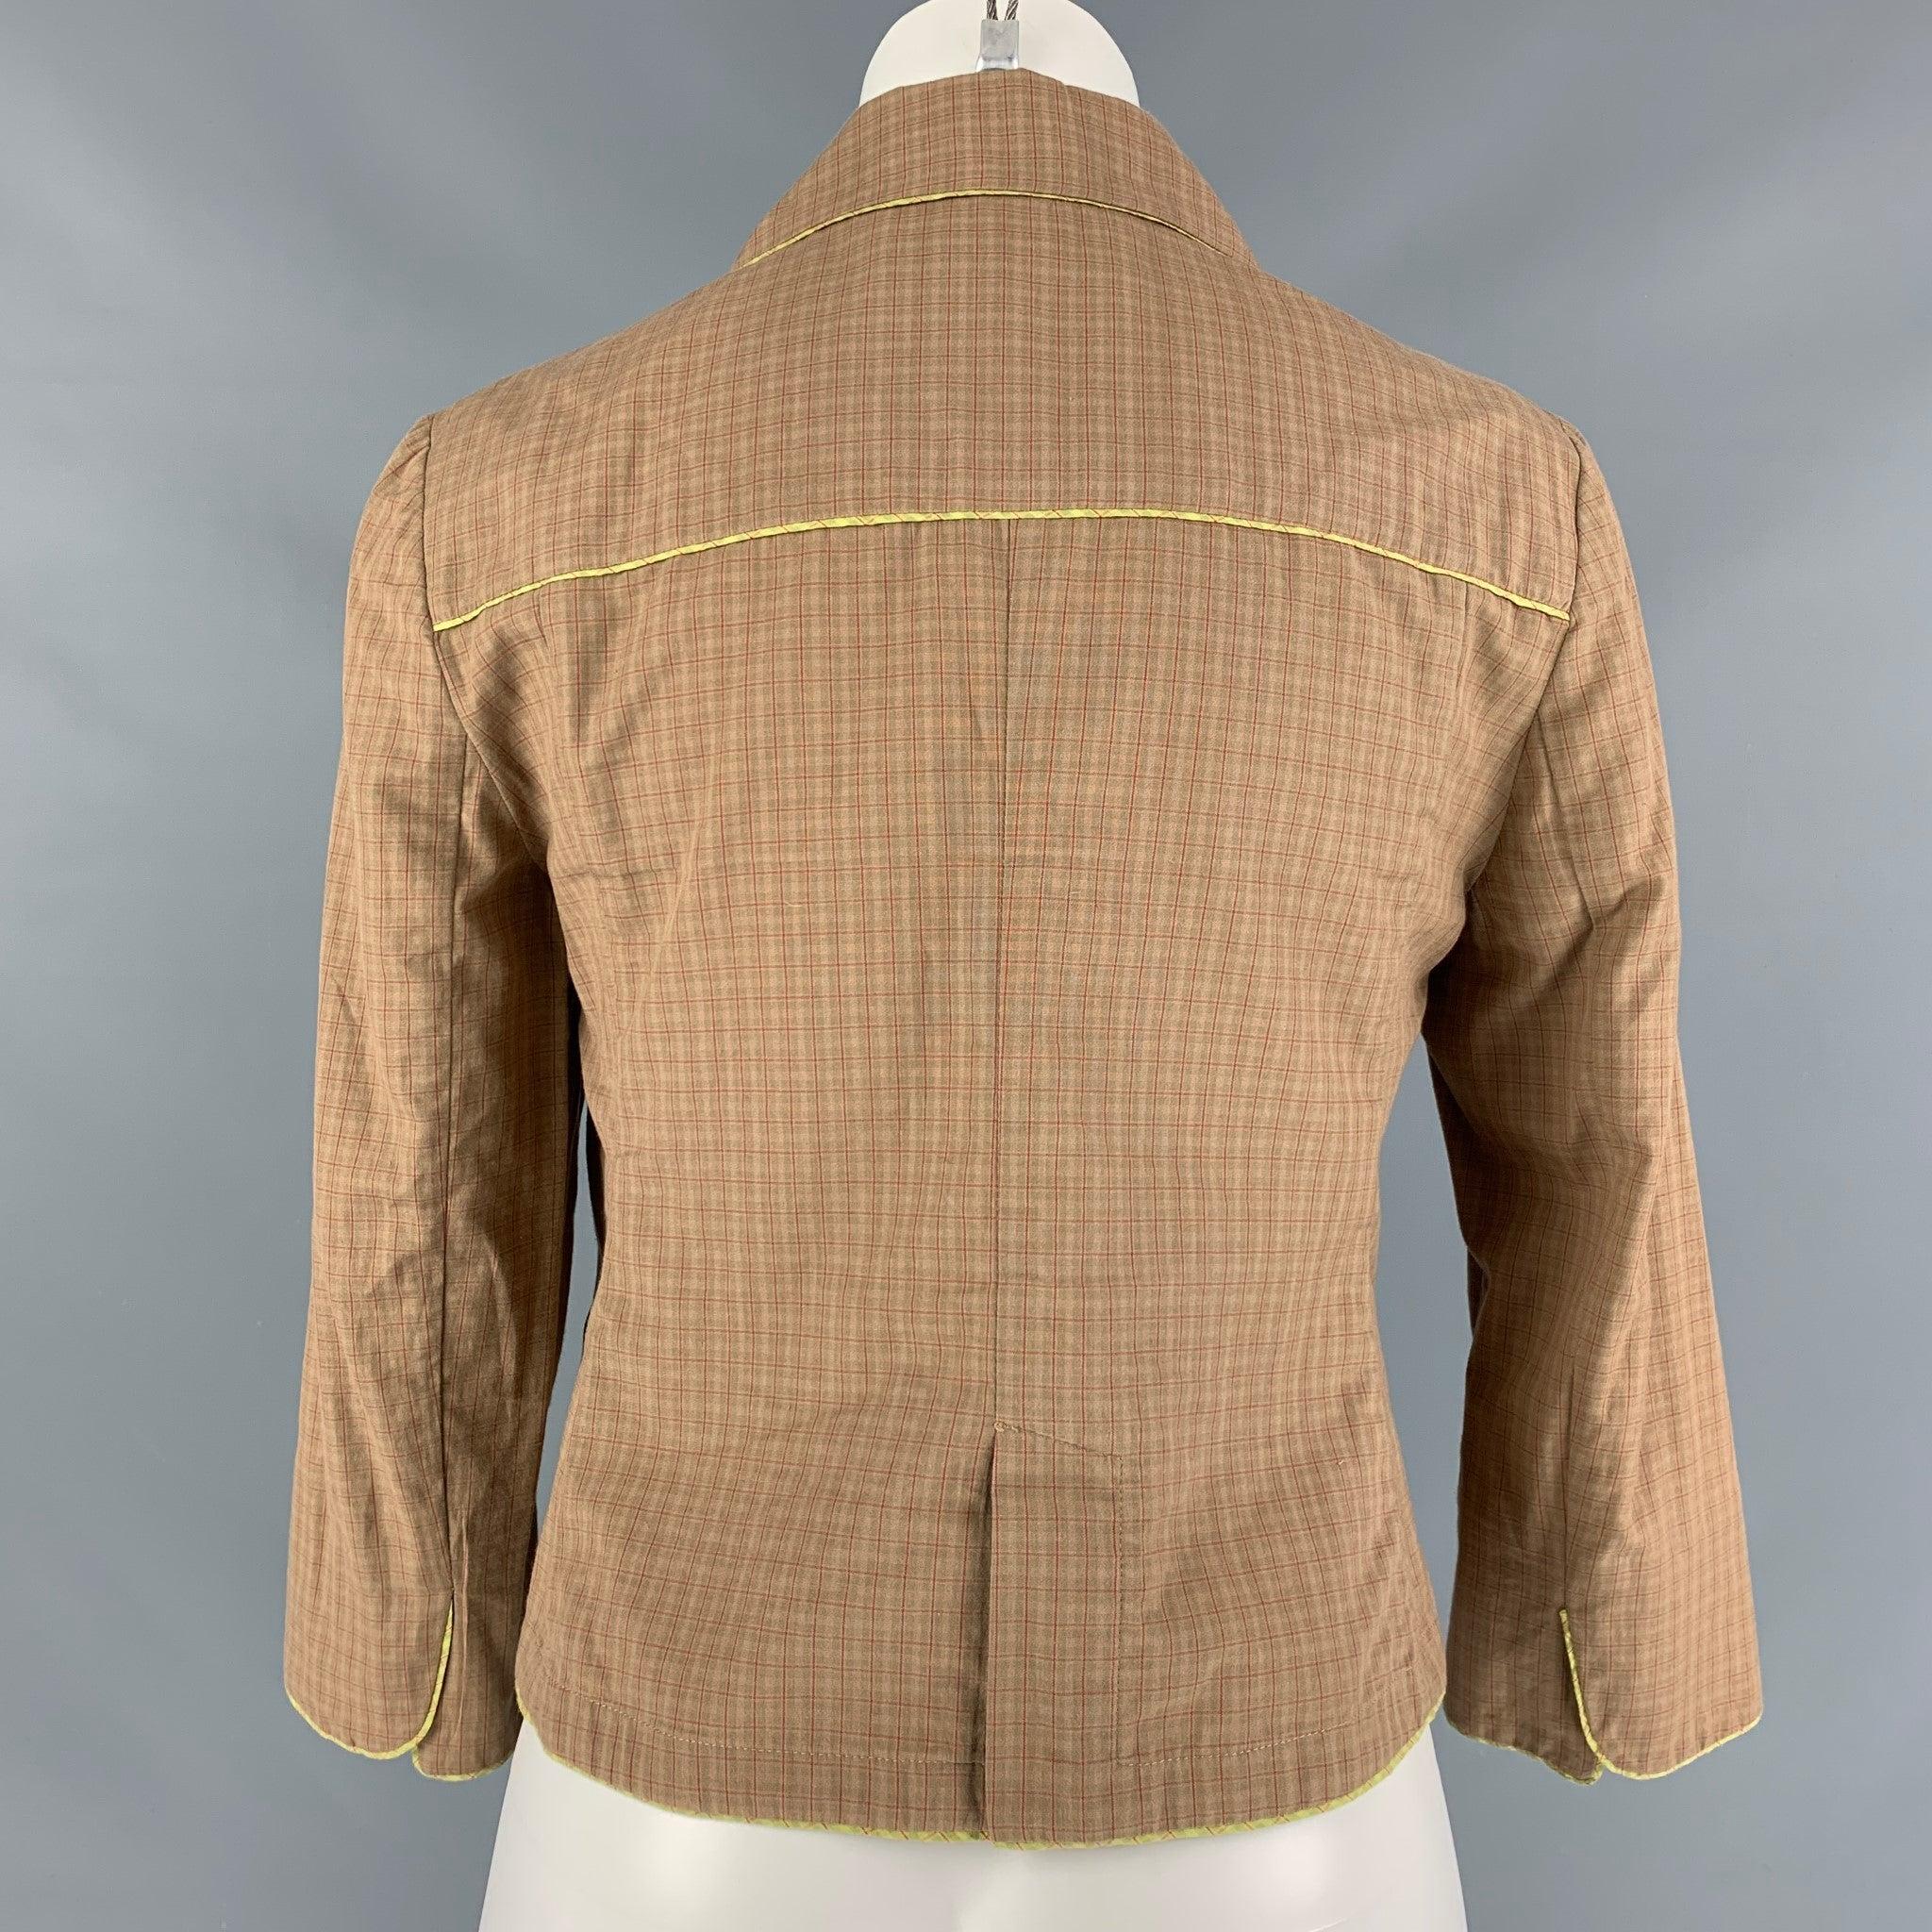 MARNI Size 4 Tan & Red Cotton Plaid Cropped Jacket In Excellent Condition For Sale In San Francisco, CA